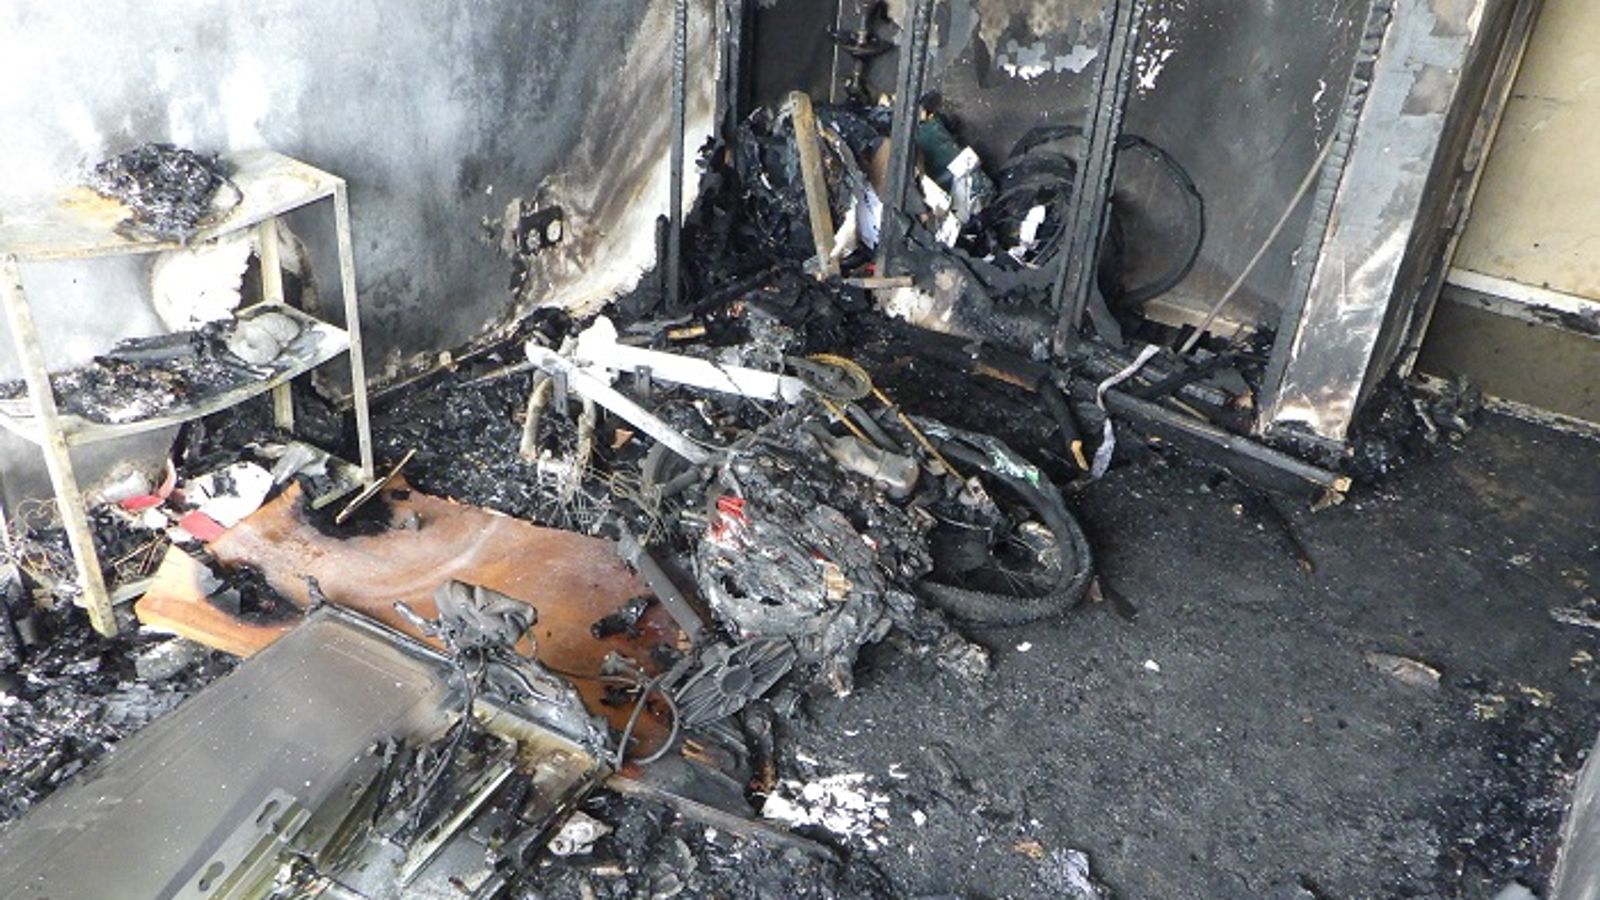 'Alarming' increase in the number of fires caused by e-scooter and e-bike batteries